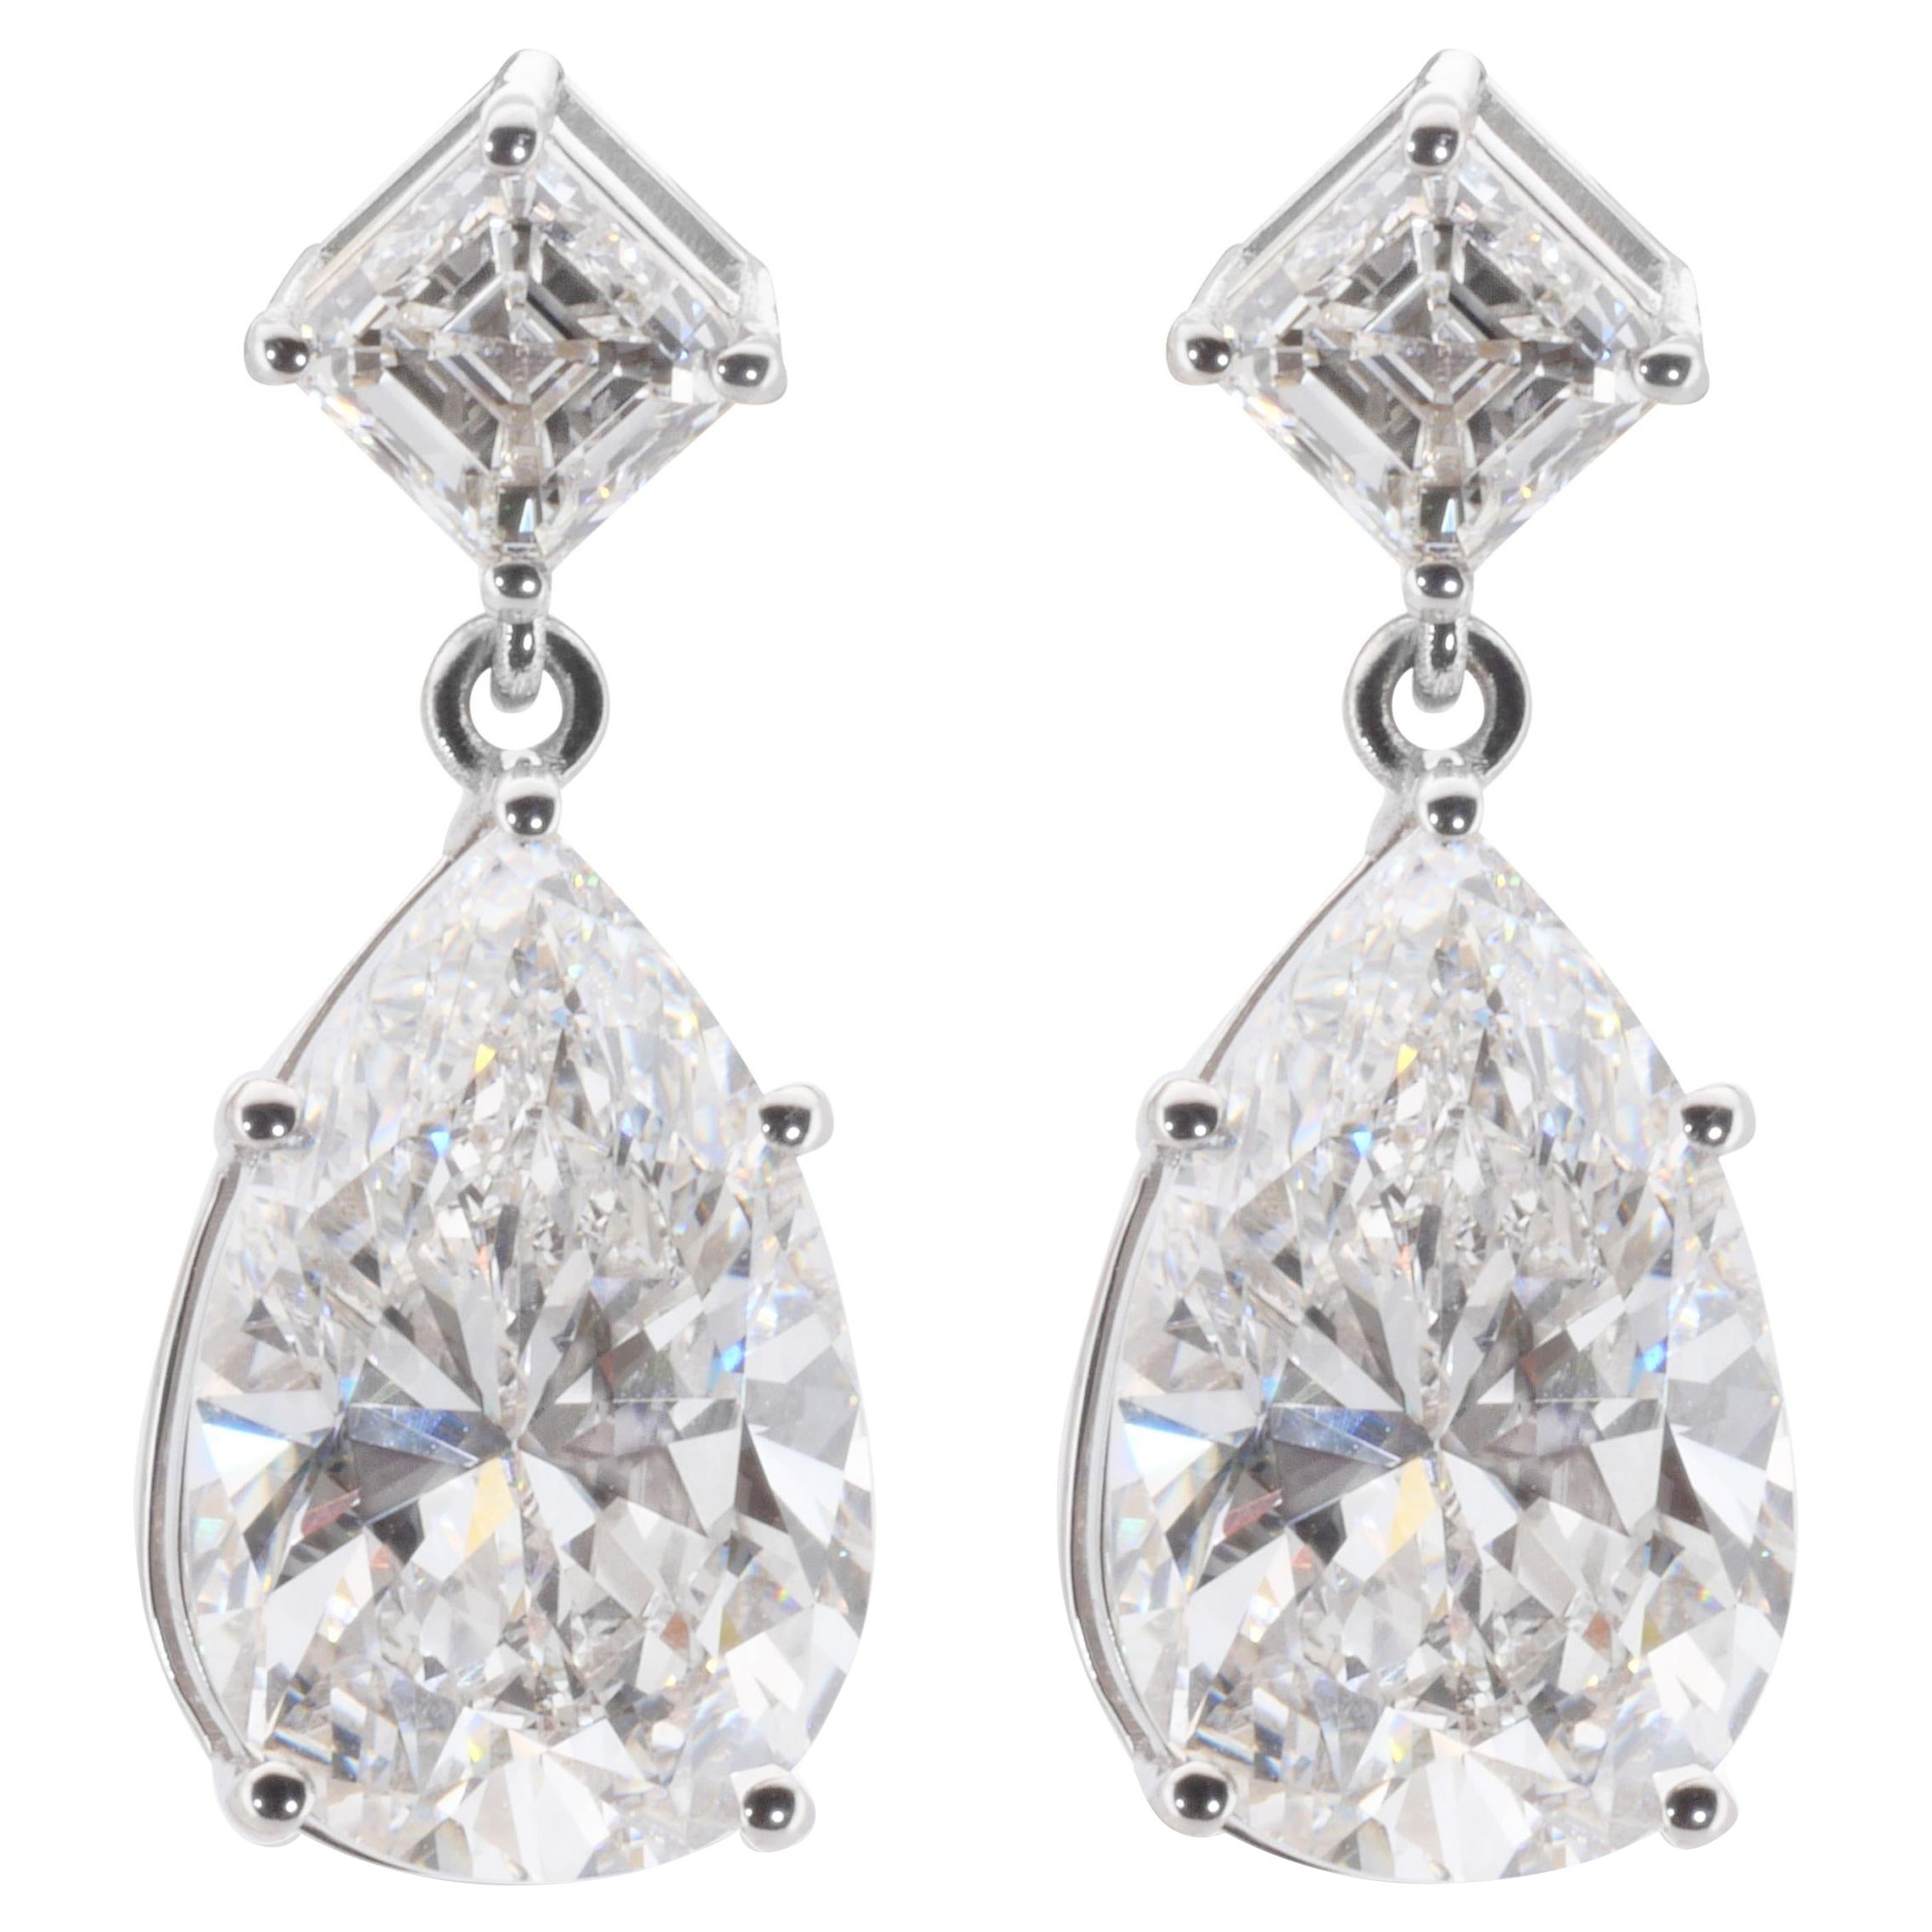 Dazzling 18k White Gold Earrings w/ 14.19 Carat Natural Diamonds GIA Certificate For Sale